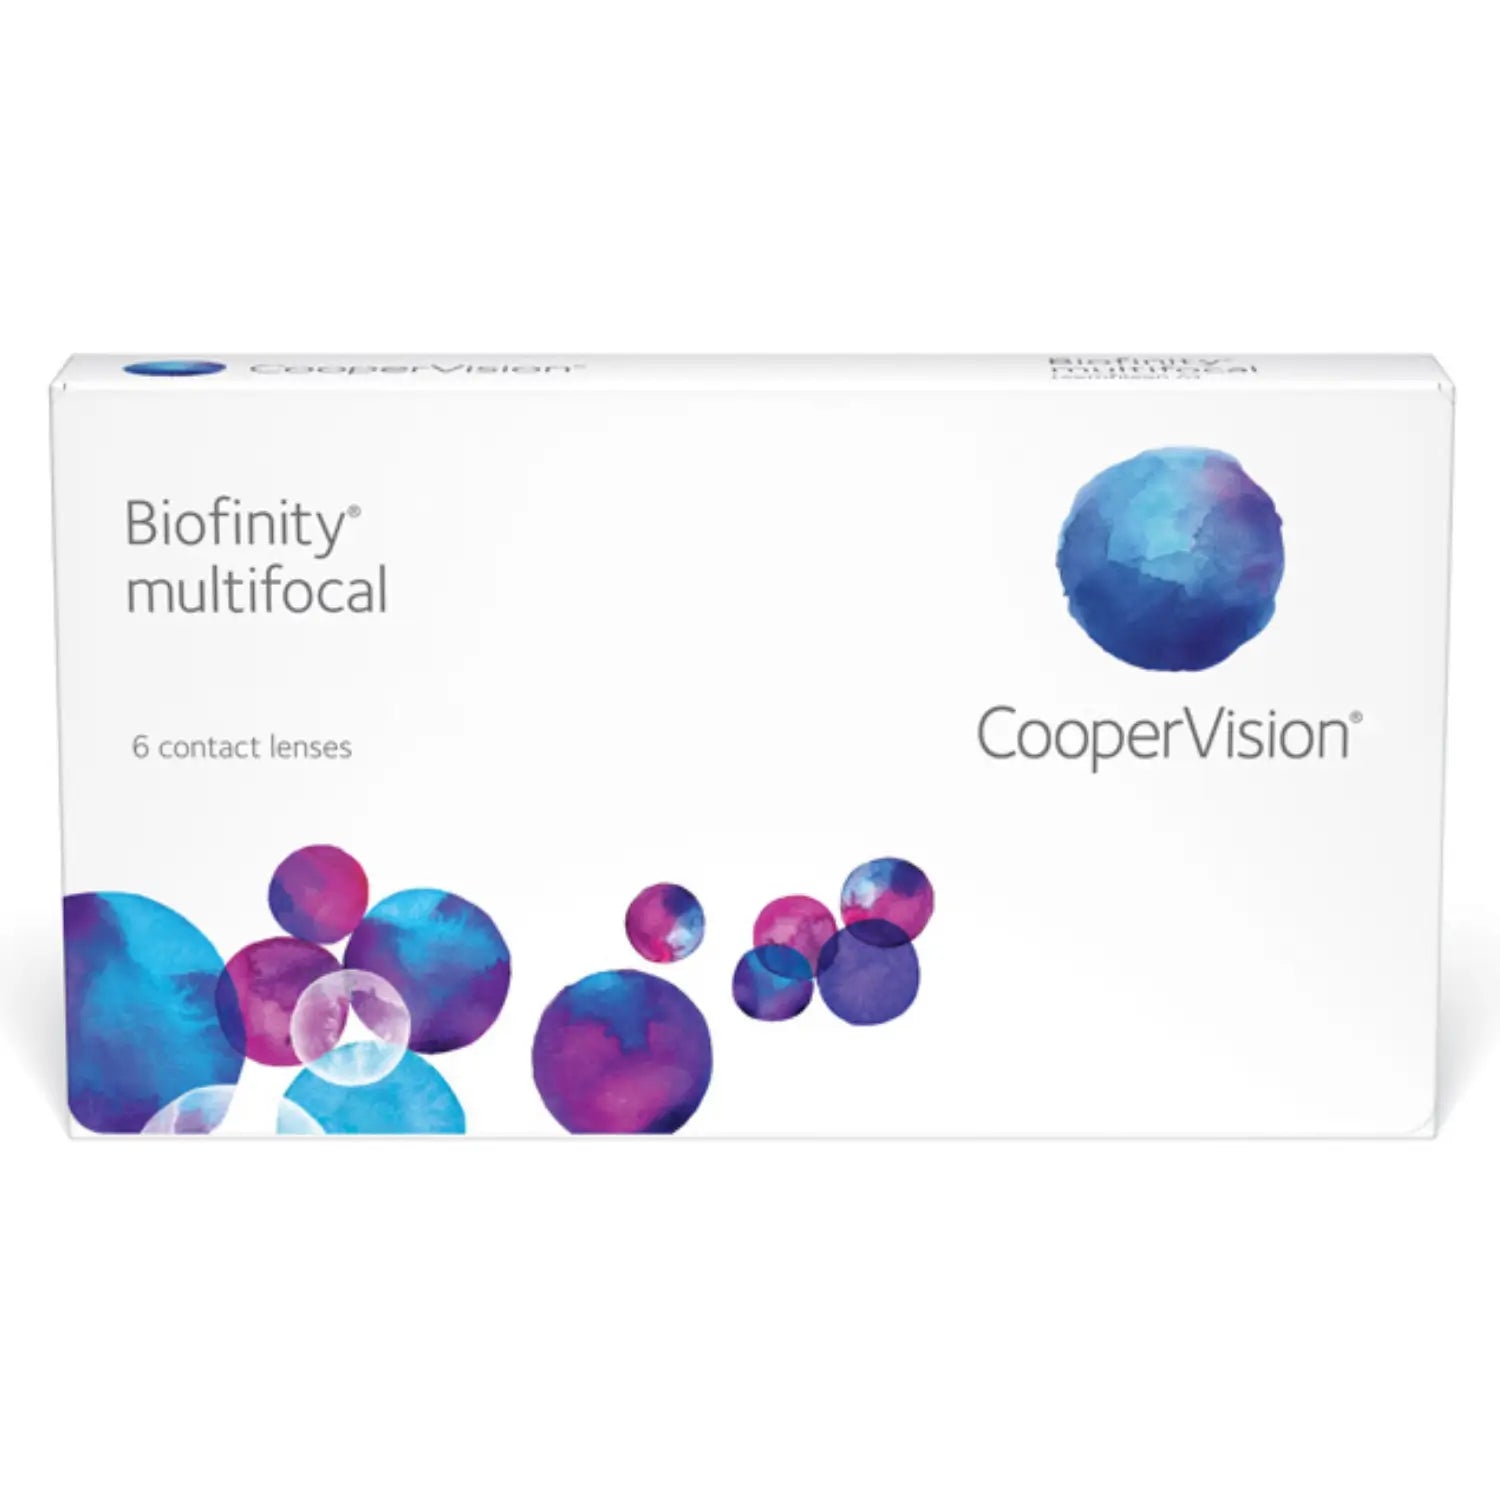 Certified Biofinity monthly multifocal Contact Lenses by Cooper Vision on sale online at The Optical Co at the best prices